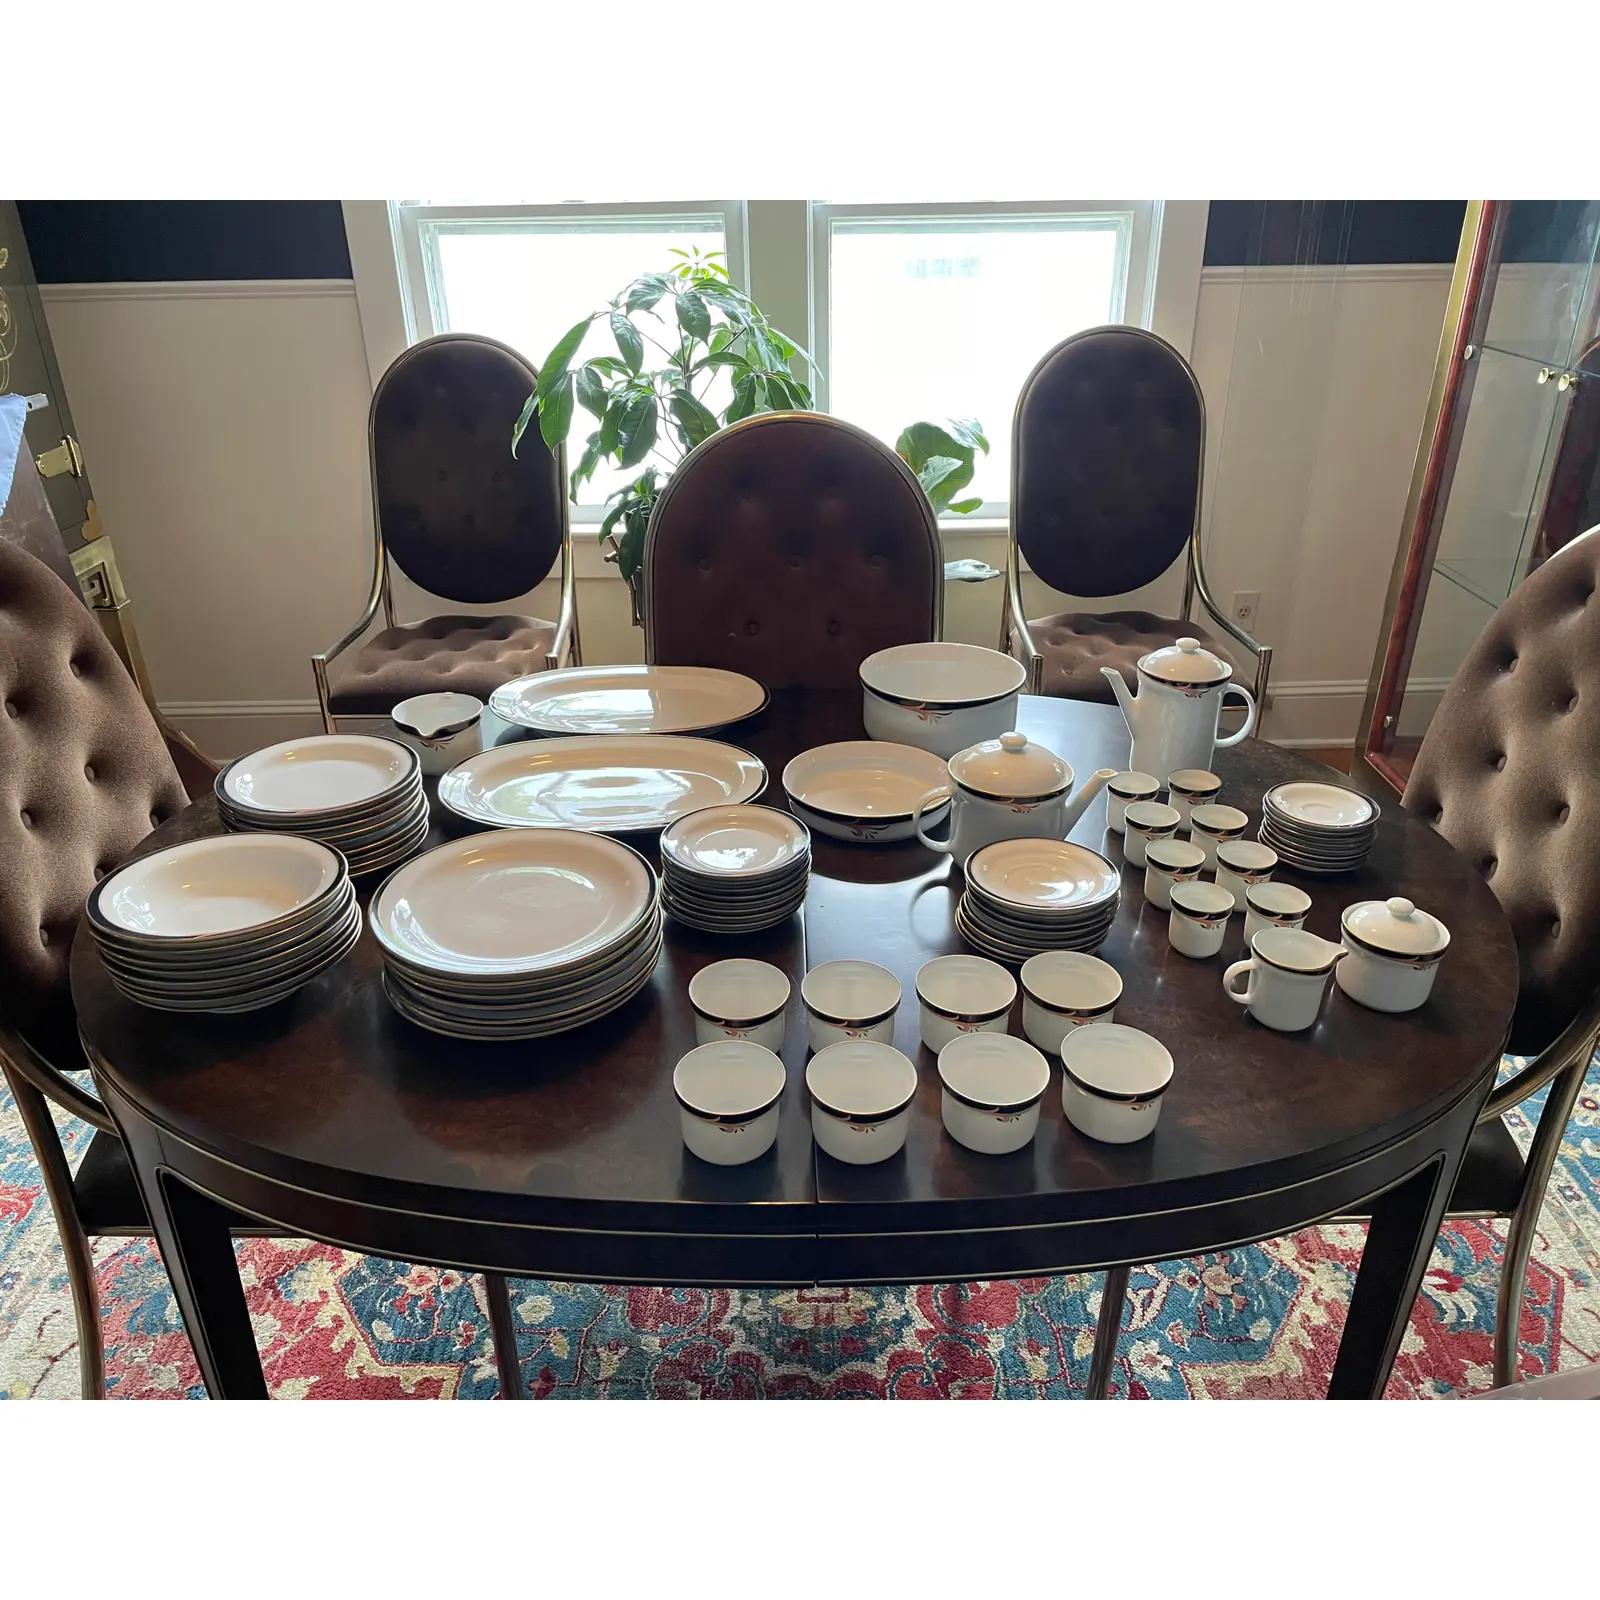 Vintage Richard Ginori Dinnerware. 73 pieces all in excellent condition. Service for 8 plus, Salad Bowl, 2 large serving platters, shallow serving bowl, Creamer and Sugar, Coffee/Tea Pot, Cups, Saucers, Demitasse cups, saucers, and pot.
Curbside to